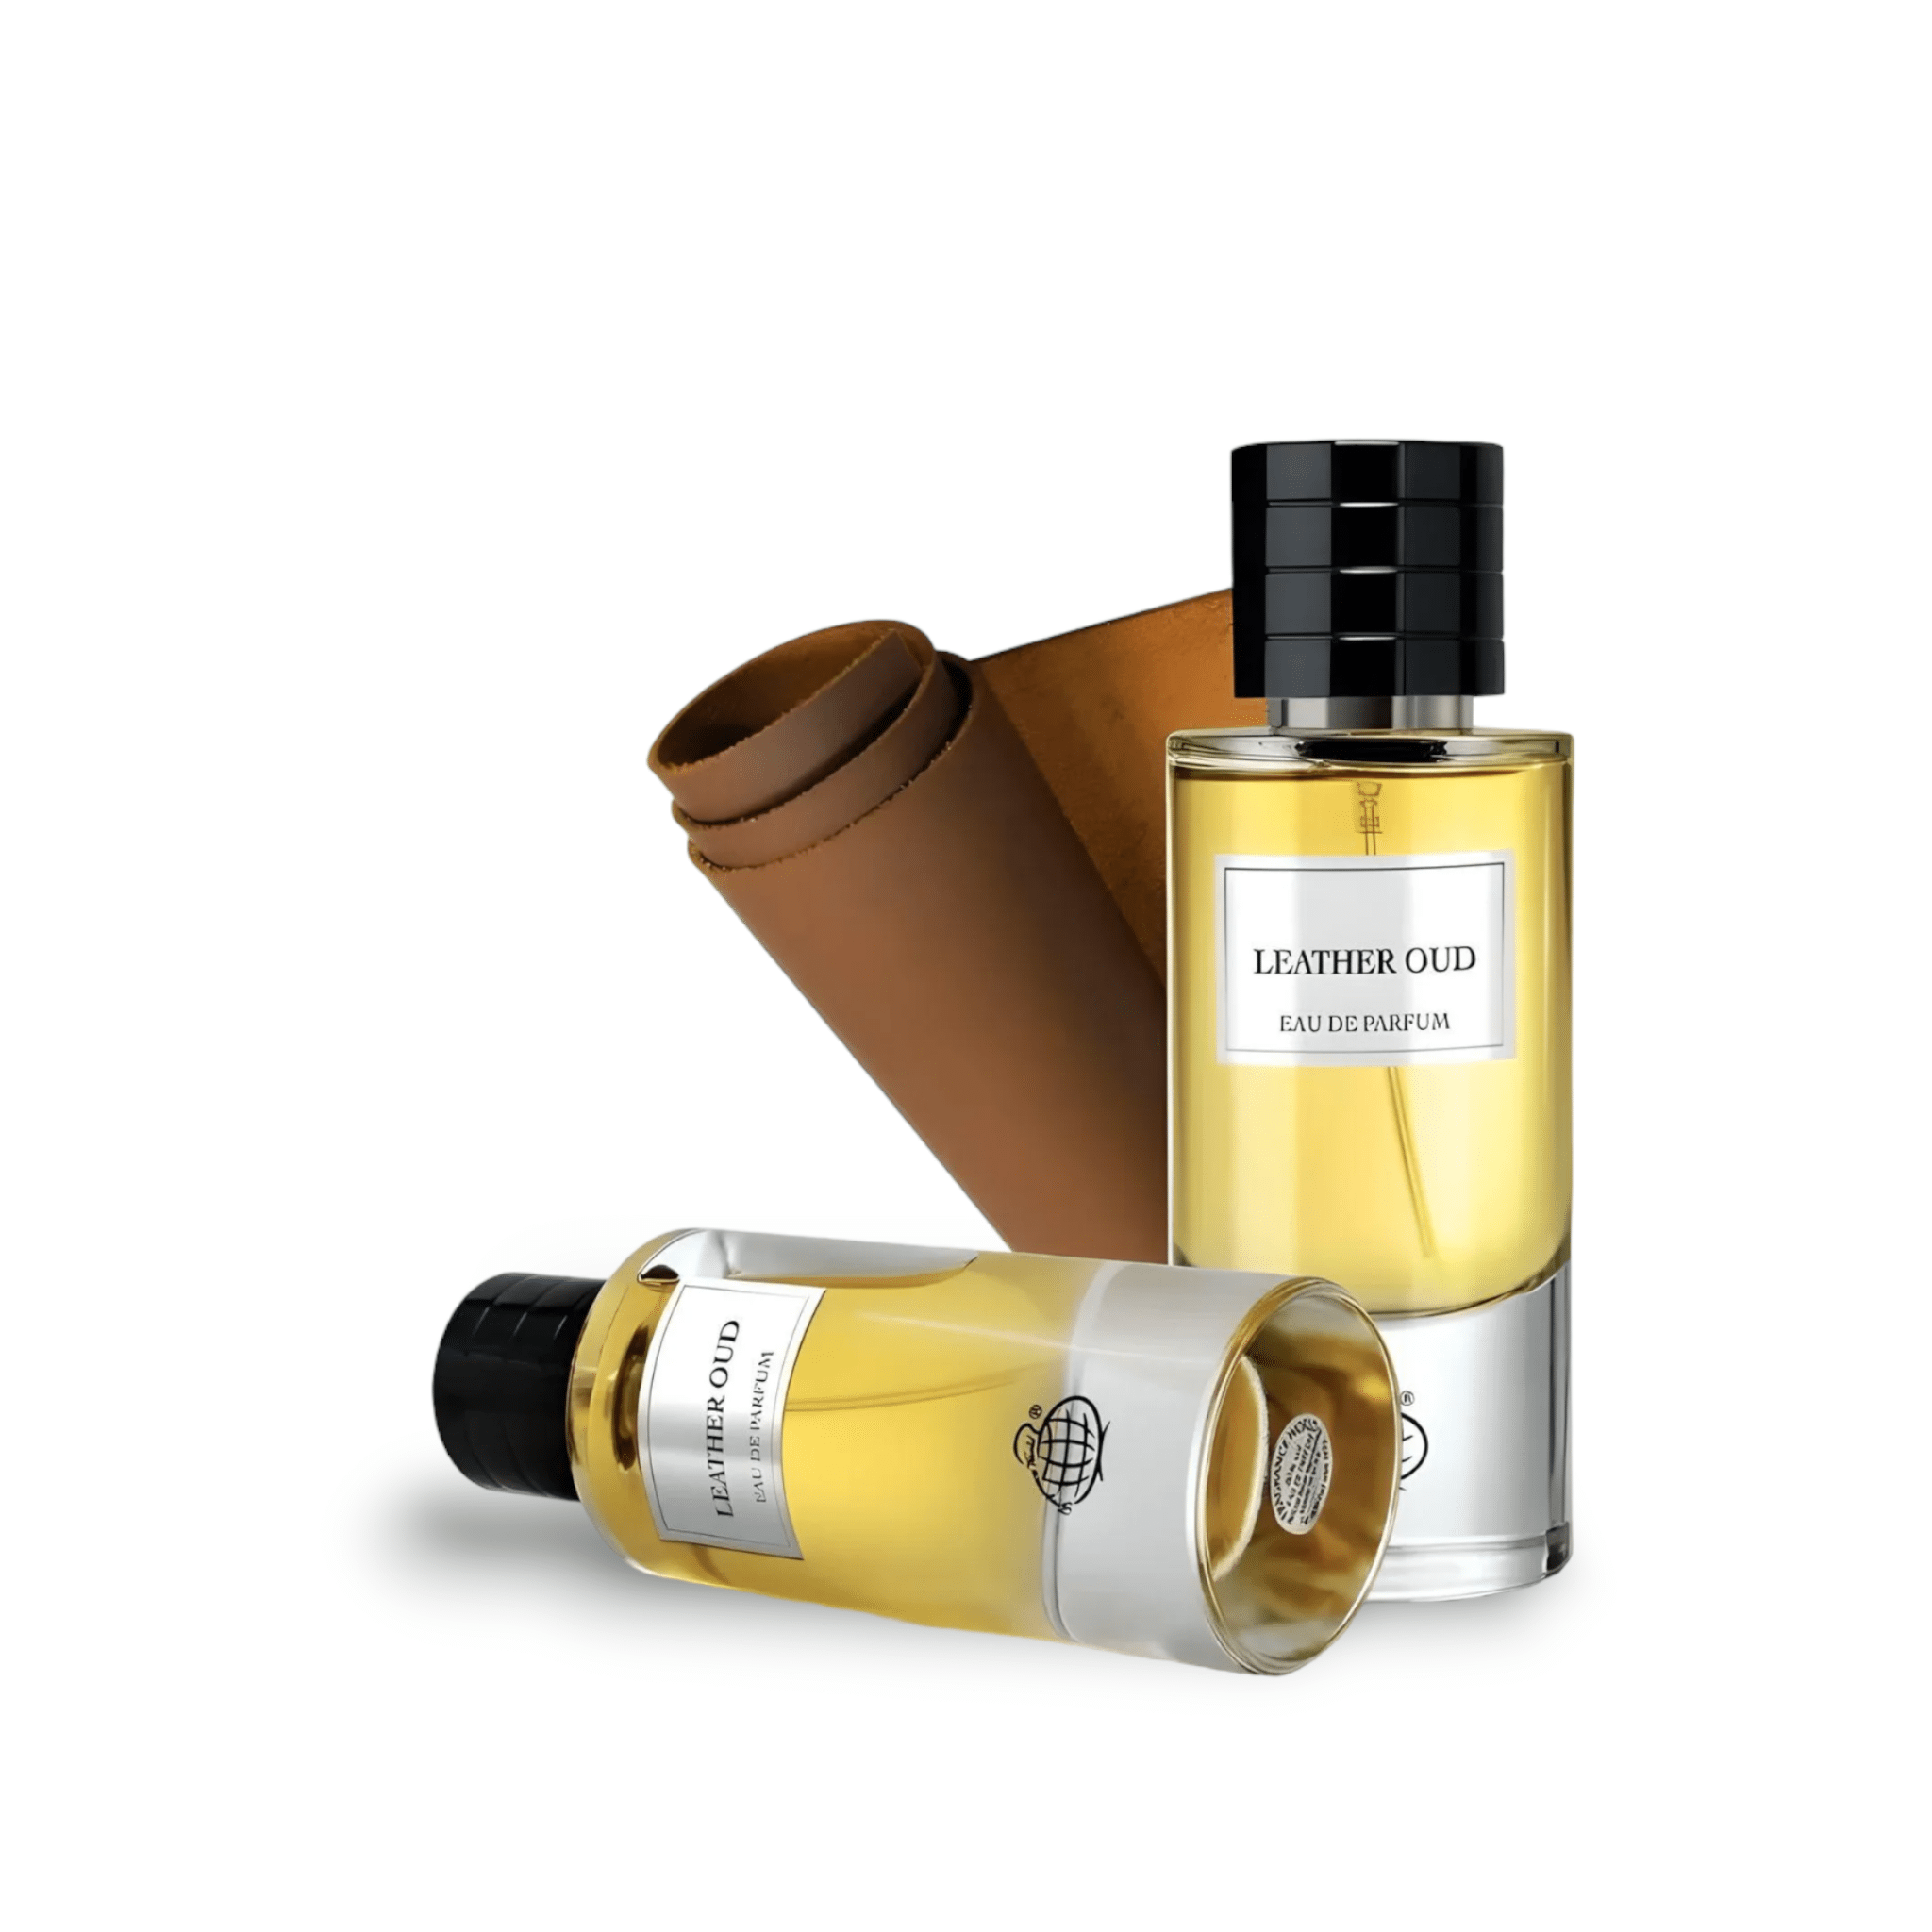 Leather Oud Perfume _ Eau De Parfum By Fragrance World (Inspired By Leather Oud)